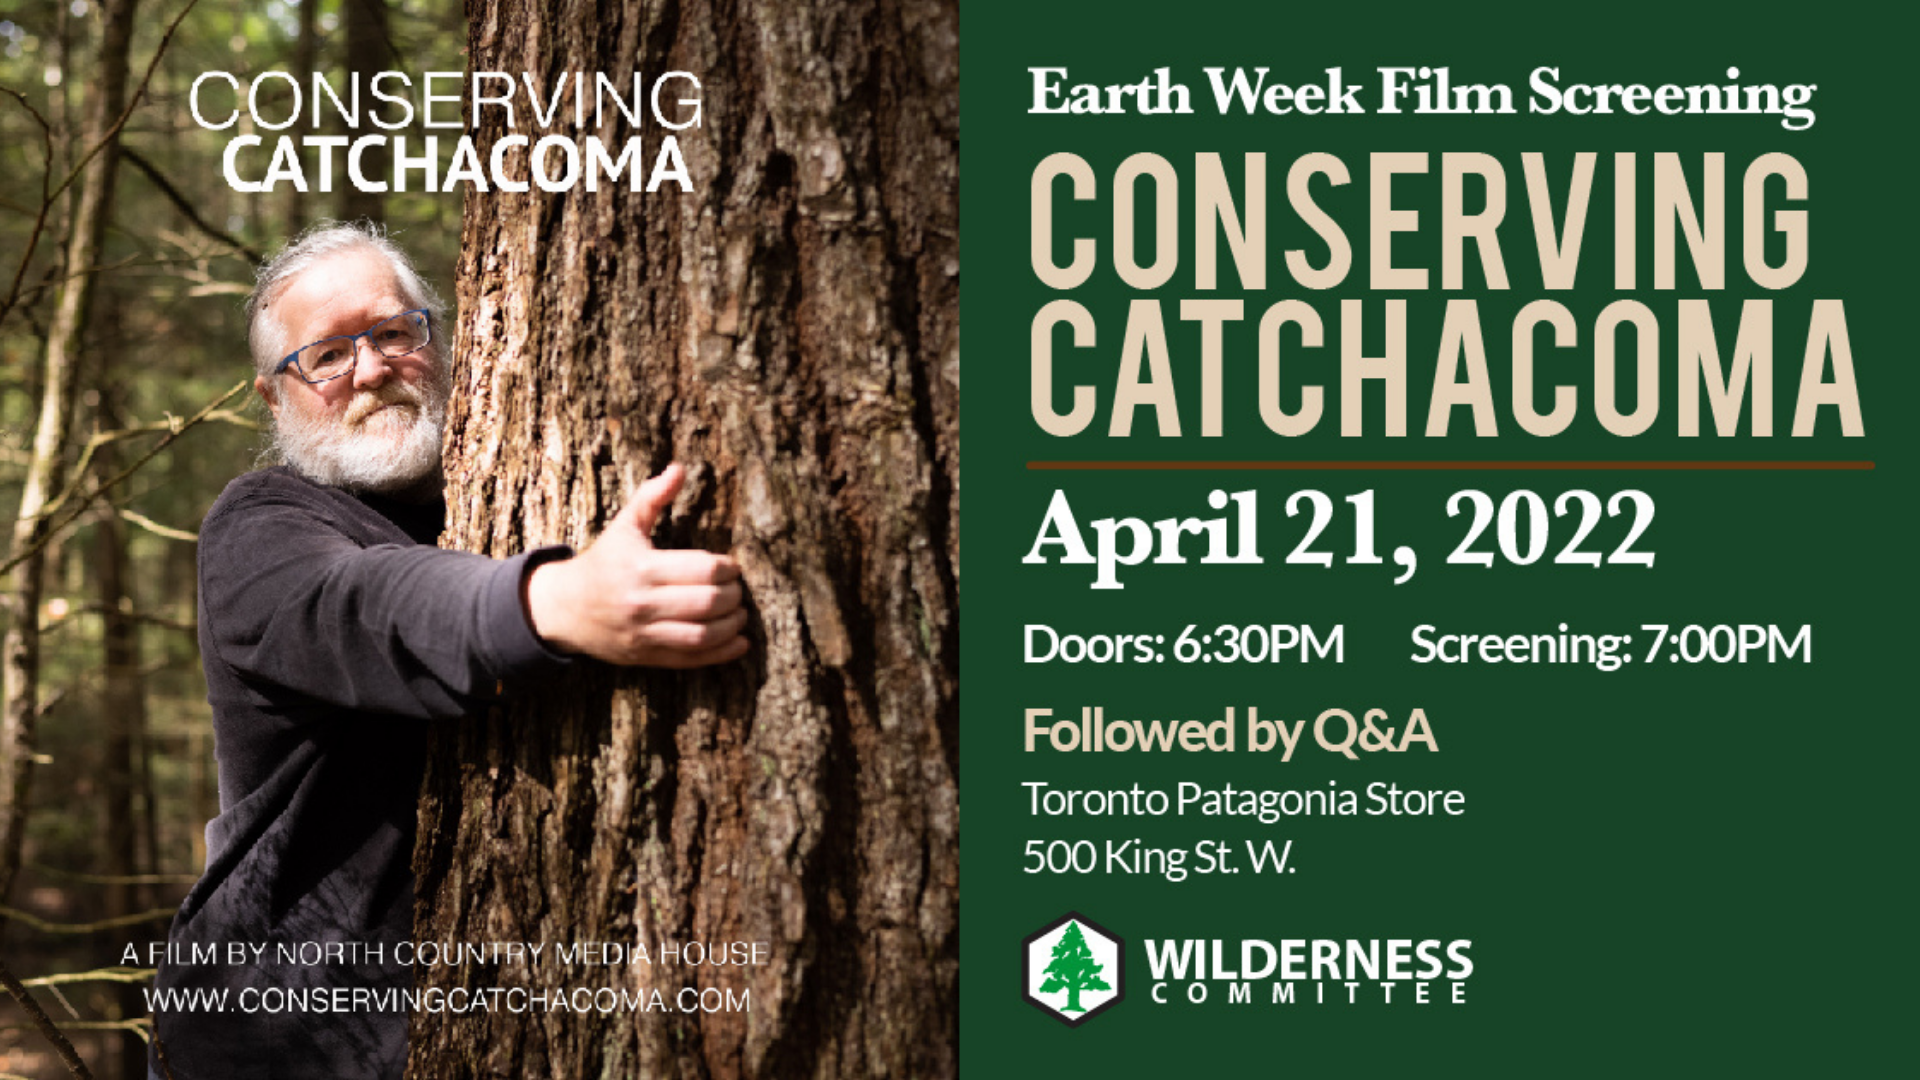 A picture of a man with white hair and a beard hugging a tree. Text on the image reads: Conserving Catchacoma, a film by North Country Media House. Earth Week film screening Conserving Catchacoma. April 21, 2022. Doors: 6:30PM Screening: 7:00PM. Followed by Q&A. Toronto Pantagonia Store. 500 King St. W. There is a logo of the Wilderness Committee at the bottom of the picture. End of image description.